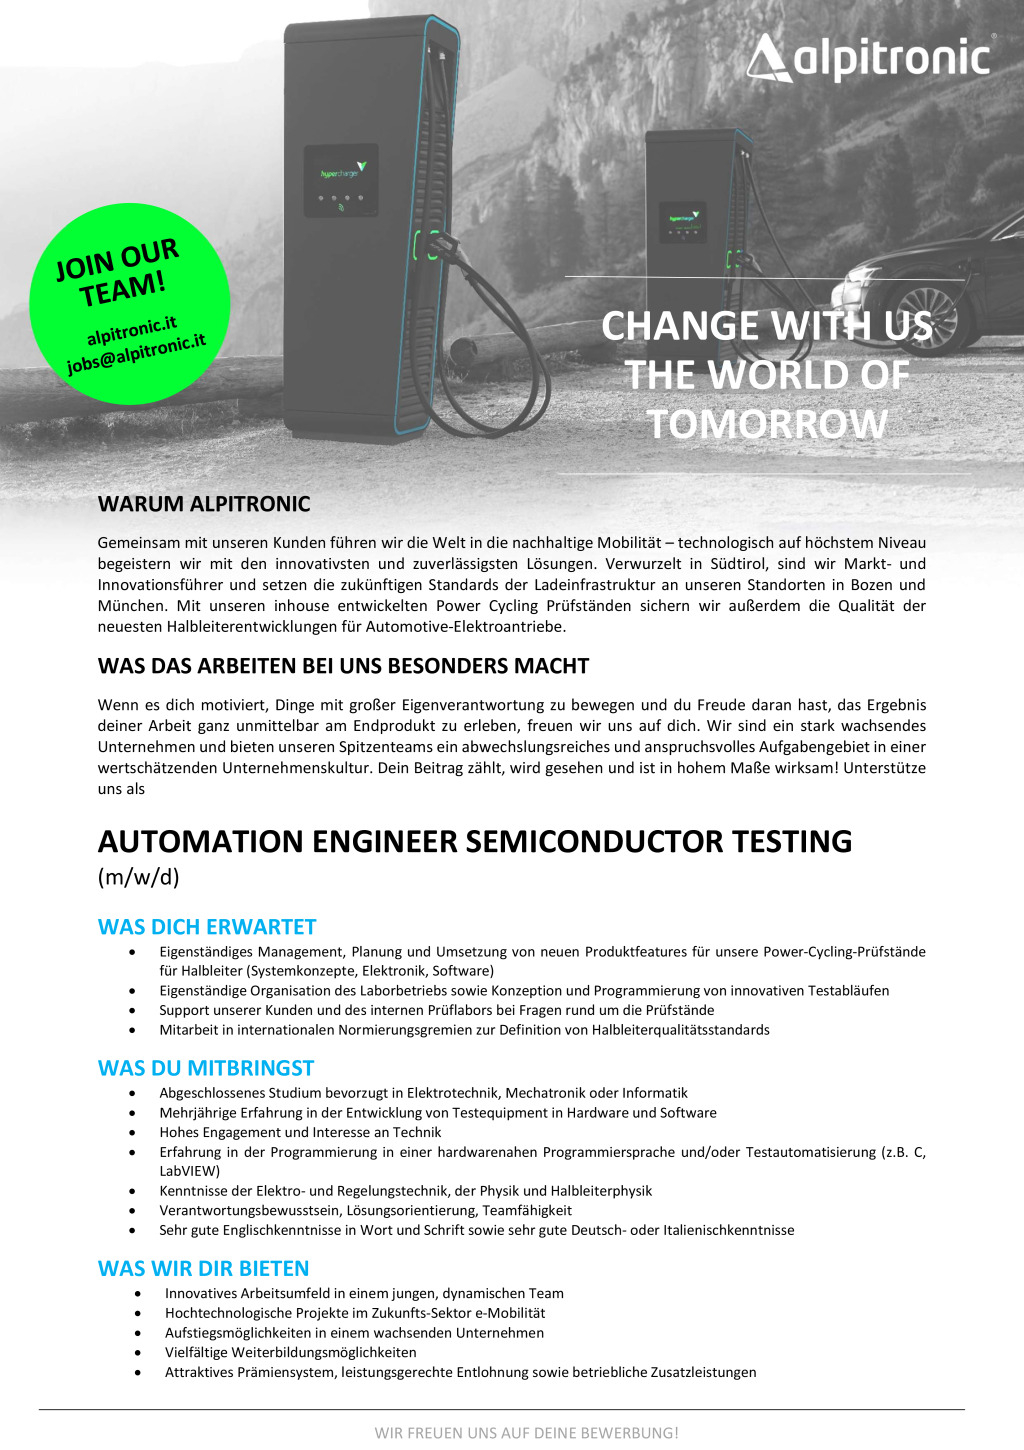 Automation Engineer Semiconductor Testing (m/w/d) 